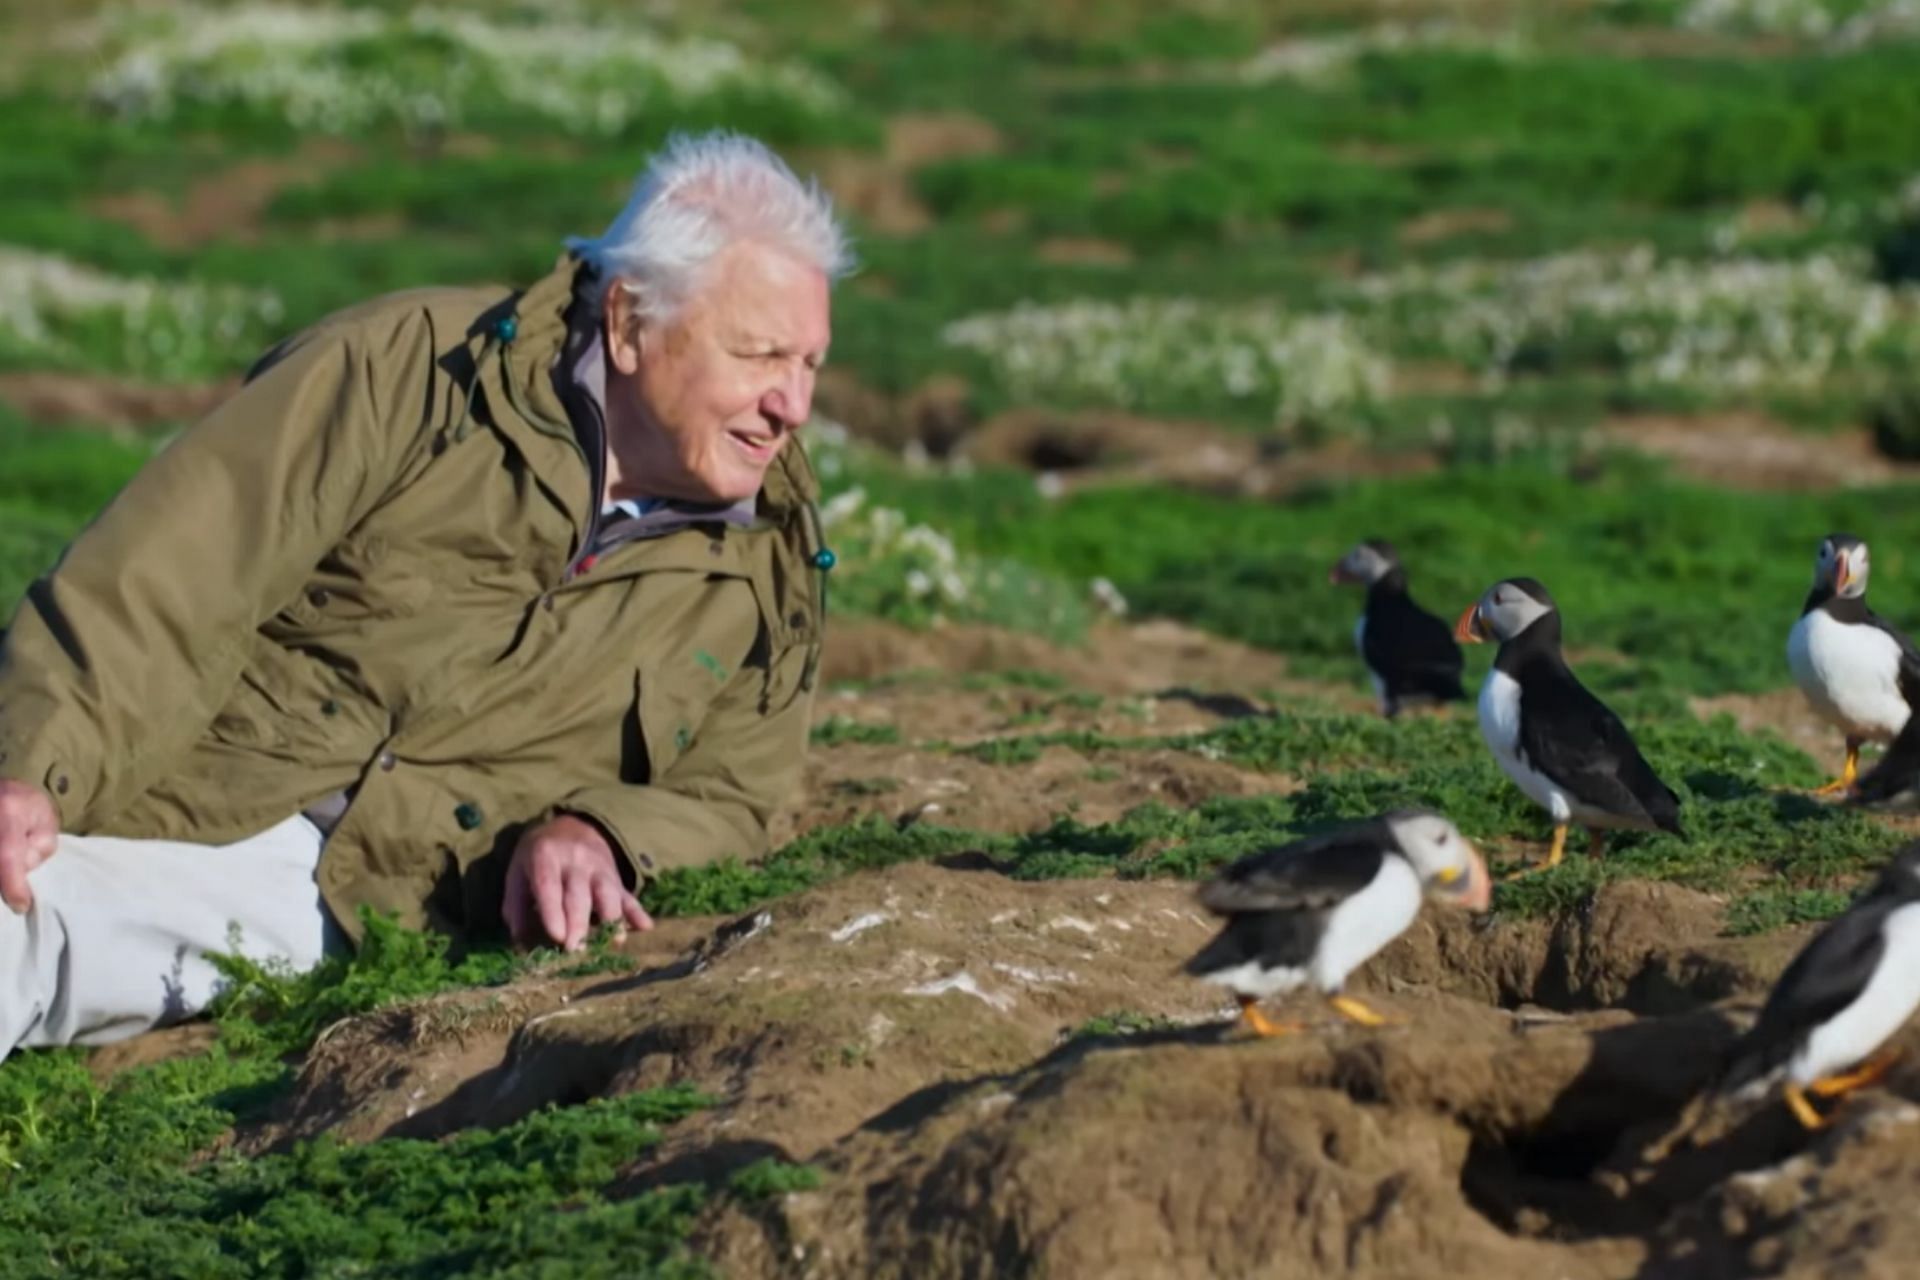 BBC will not broadcast the final episode of David Attenborough